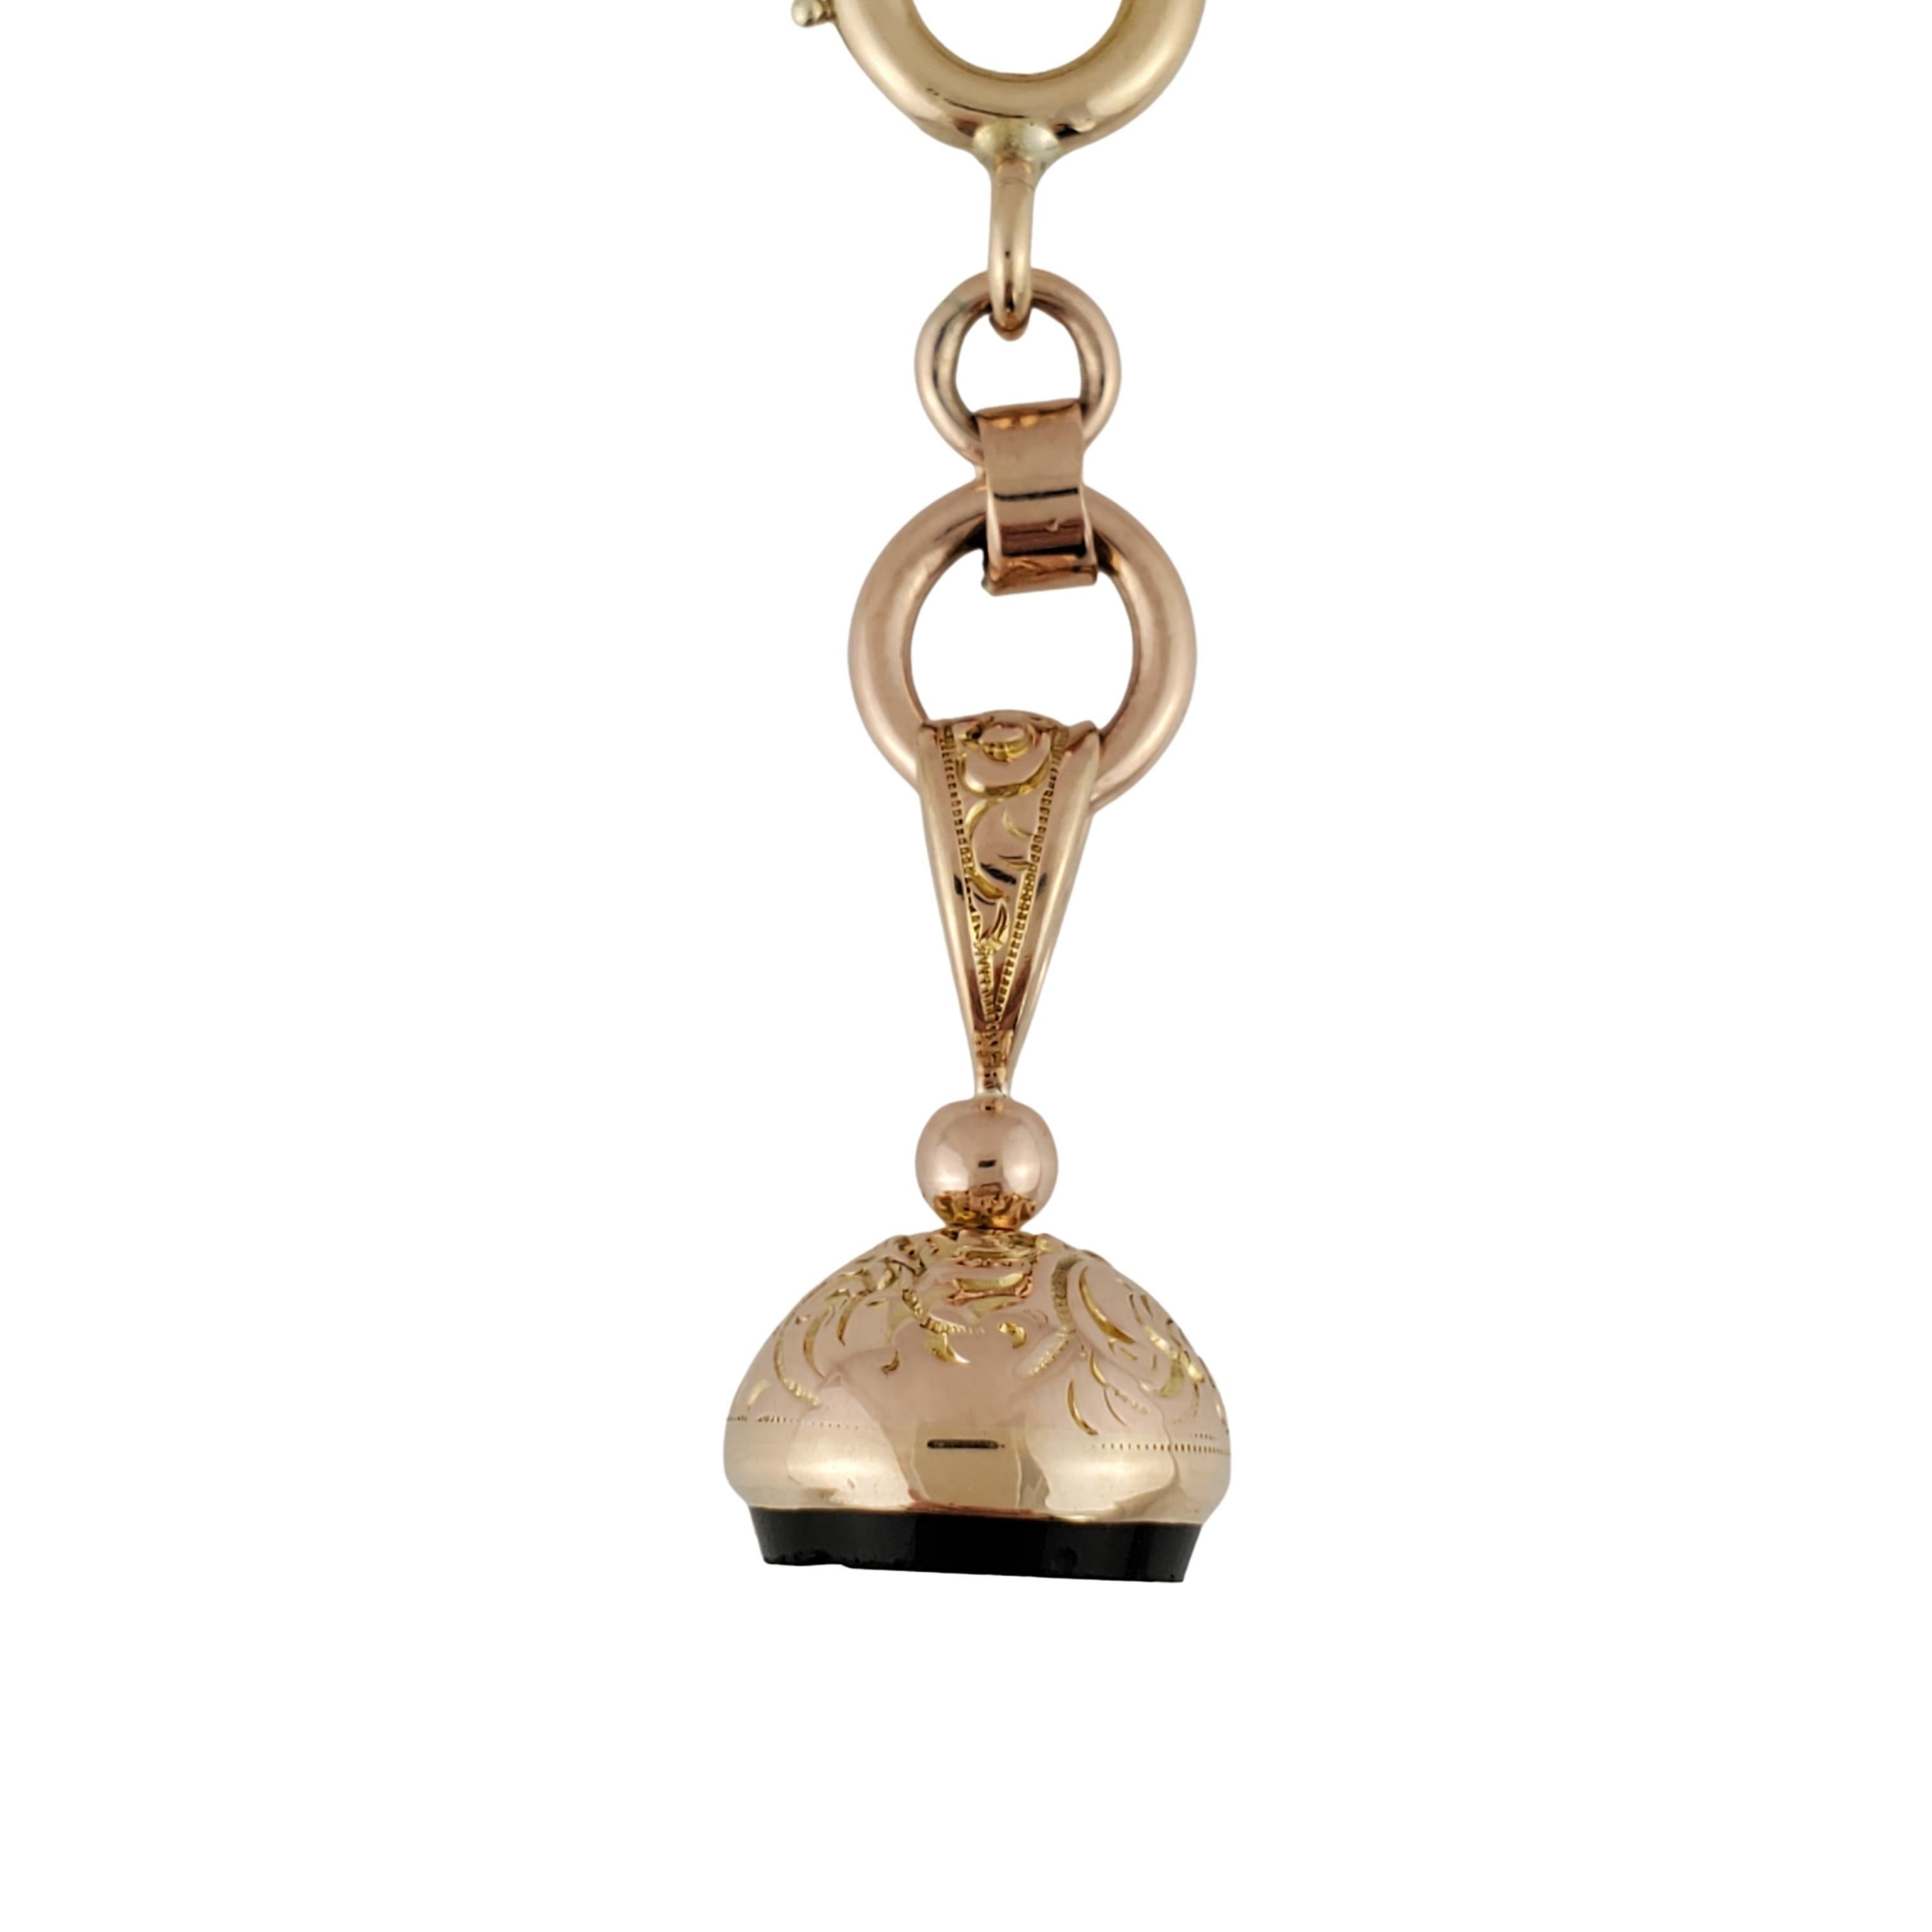 10K Yellow Gold Fob Charm

Beautiful 10K yellow gold fob charm features exquisite line work decorating the entire charm. At the base of the charm is onyx stone with a side profile of a man carved into it, minor chipping around d the edge of the